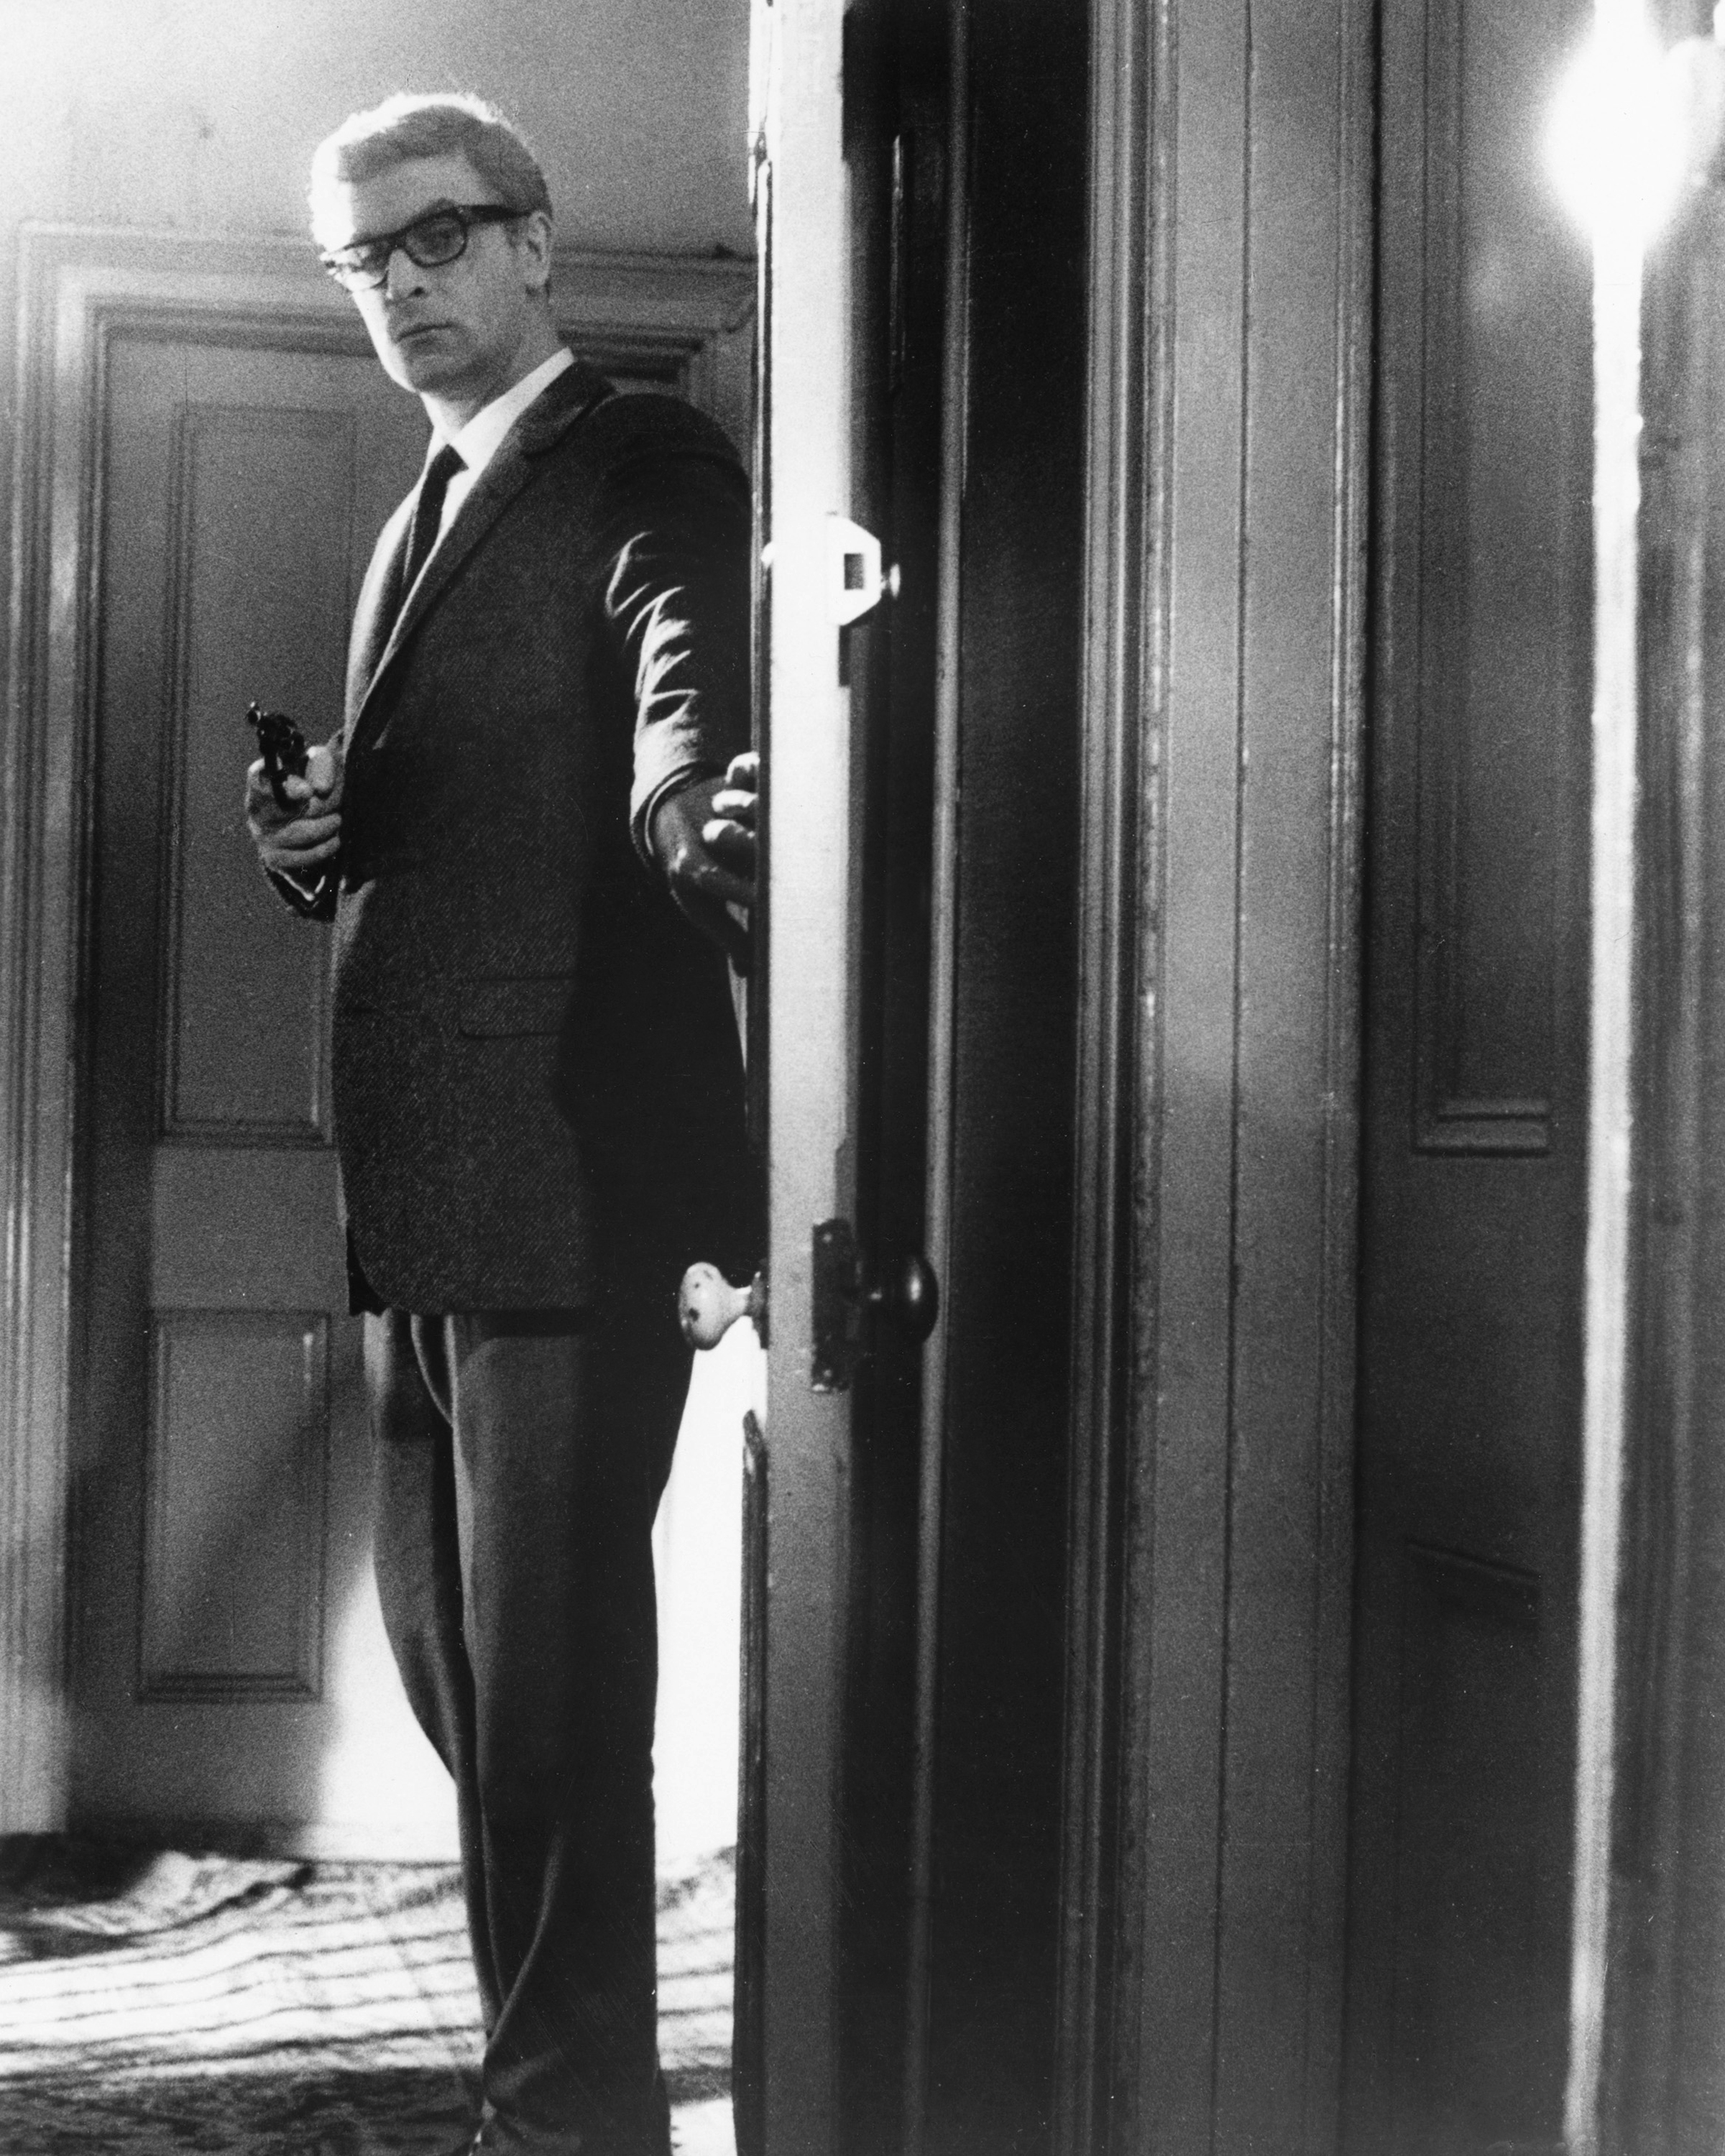 Still of Michael Caine in The Ipcress File (1965)